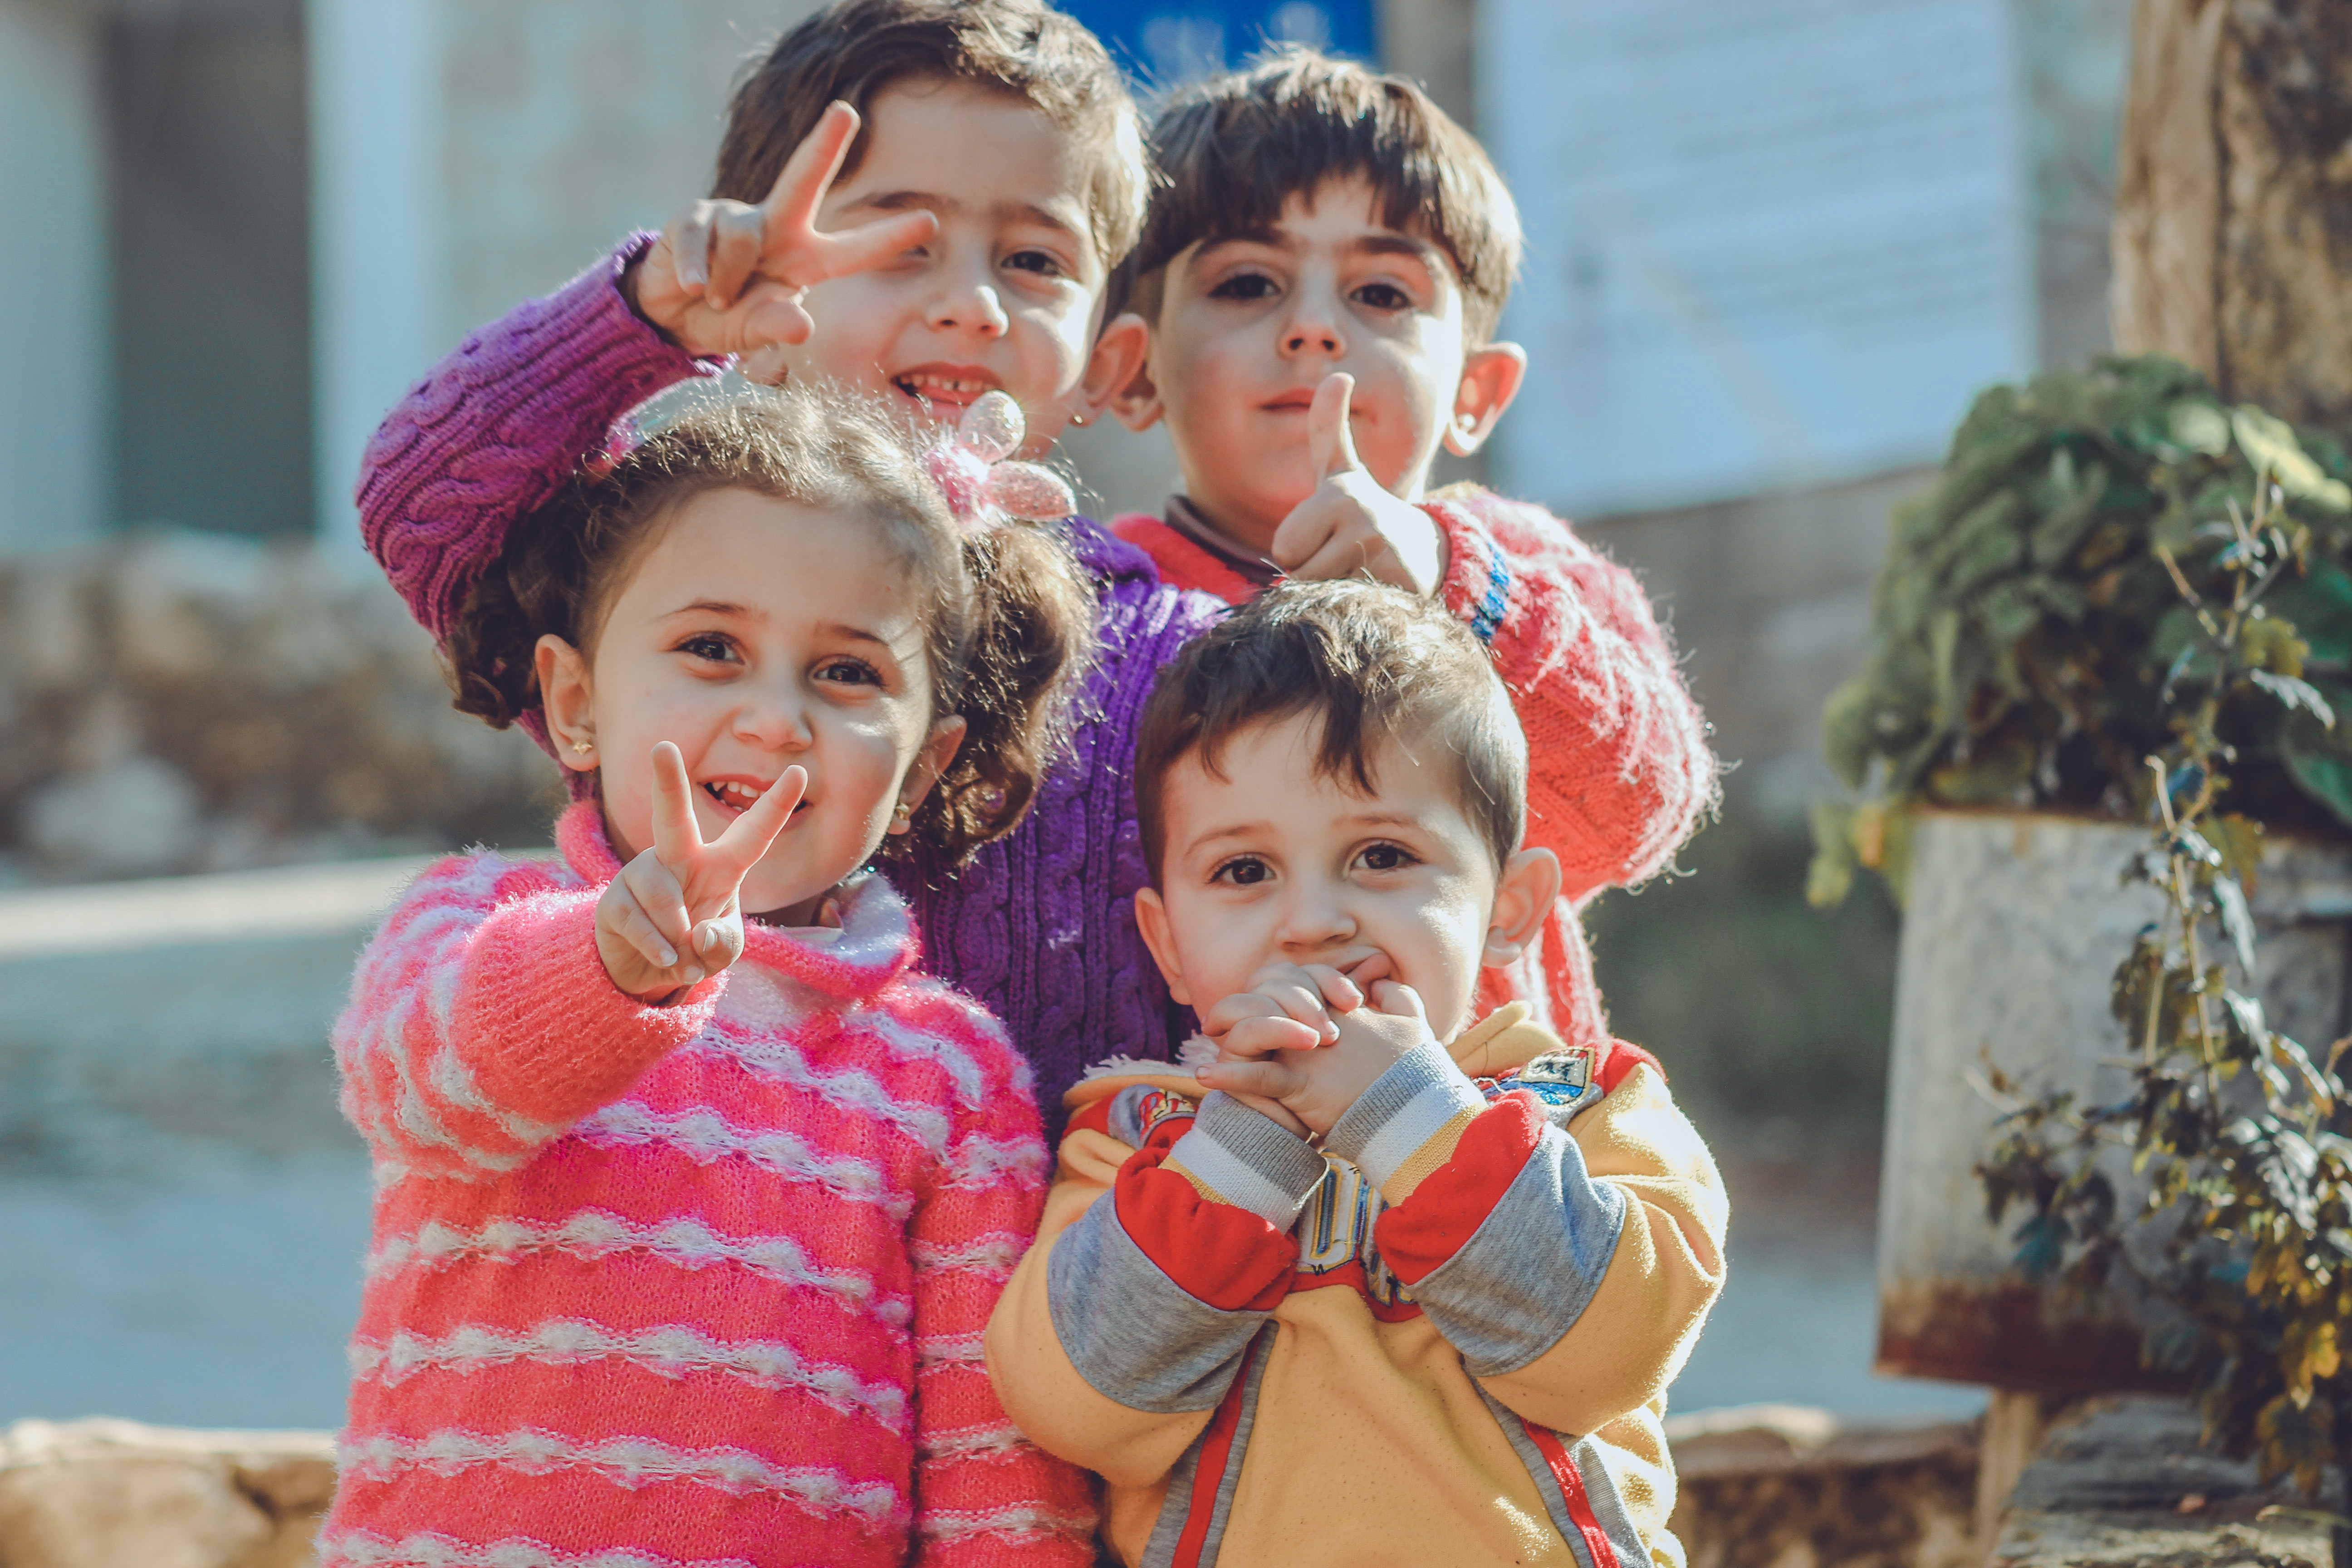 Children from another country facing the camera and smiling with peace signs